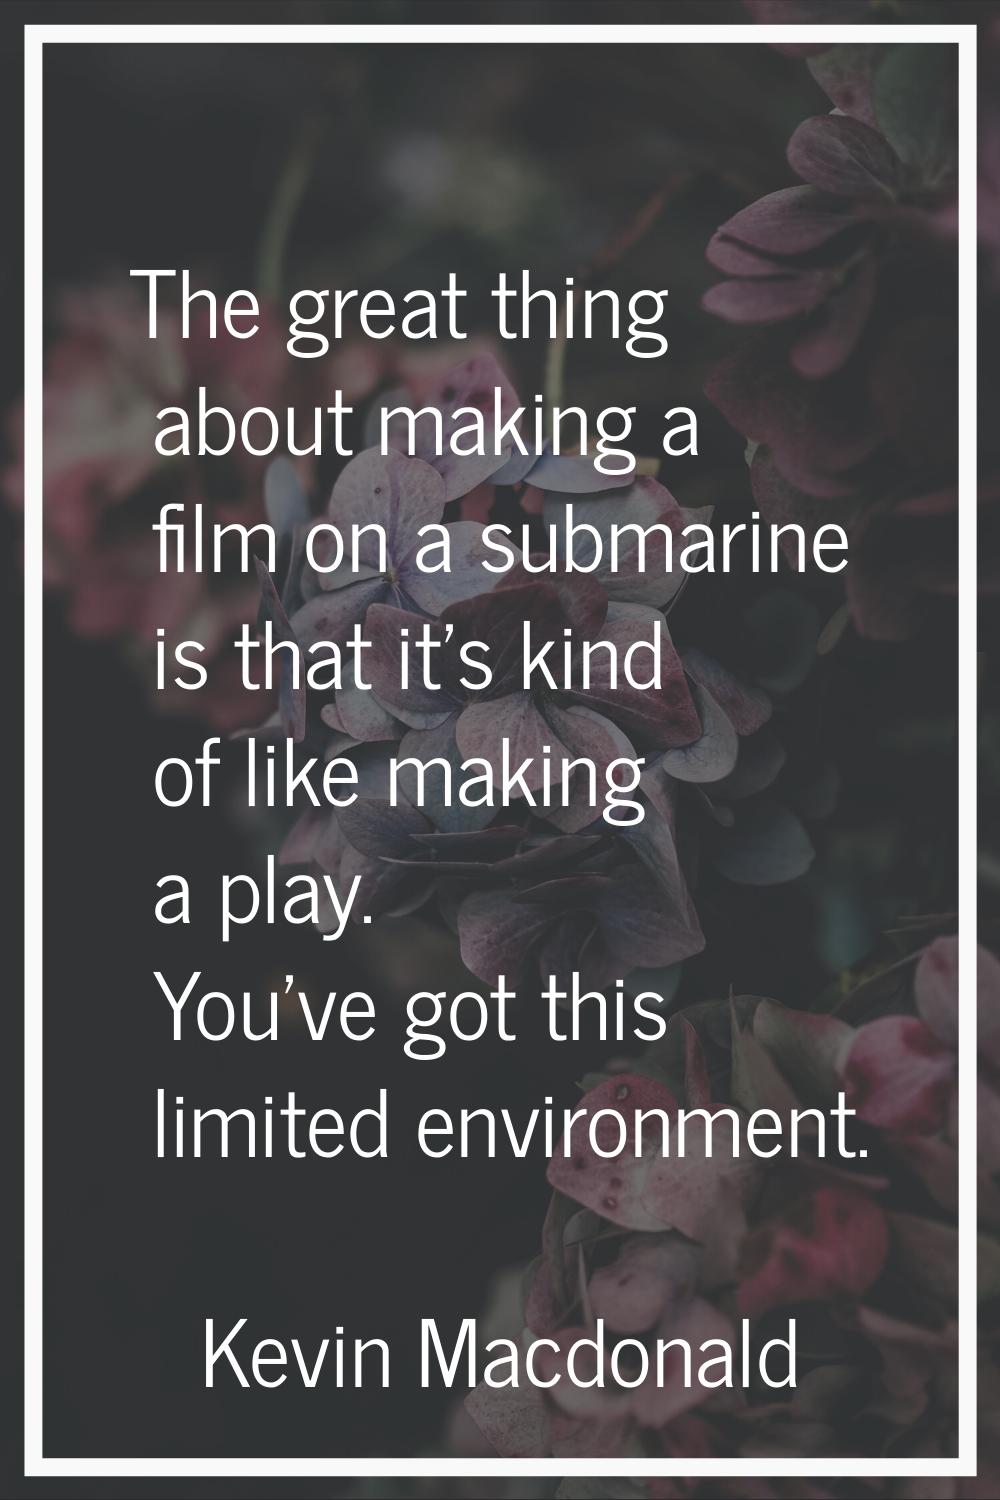 The great thing about making a film on a submarine is that it's kind of like making a play. You've 